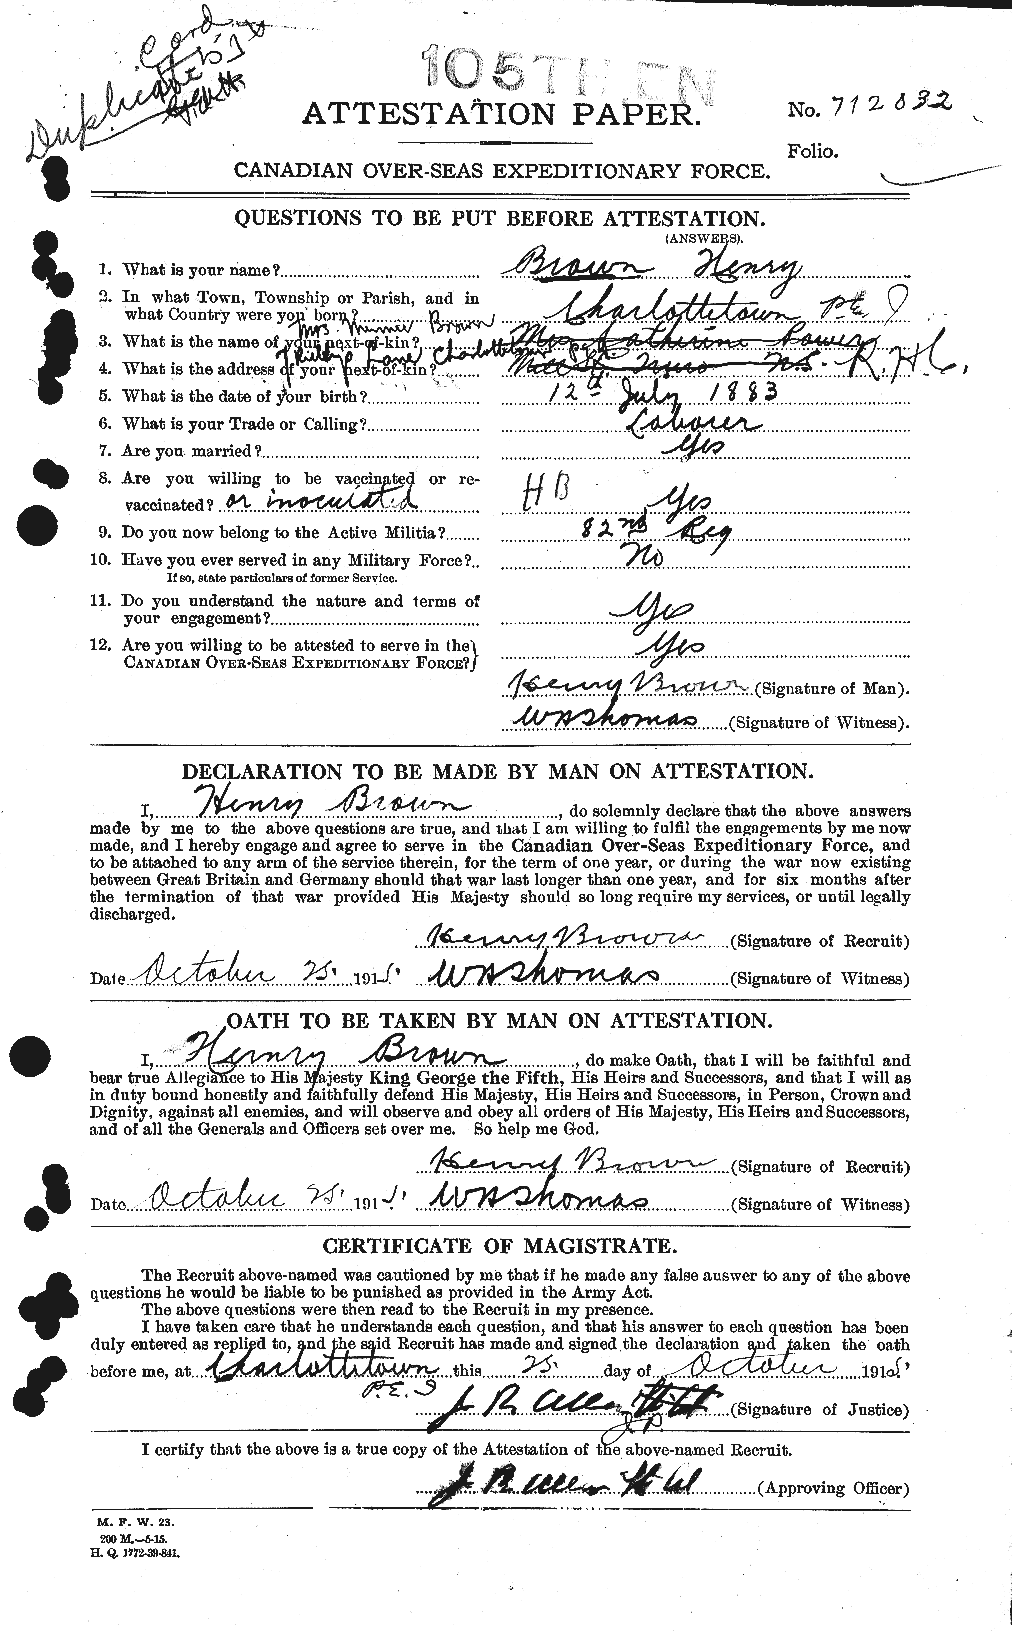 Personnel Records of the First World War - CEF 265507a